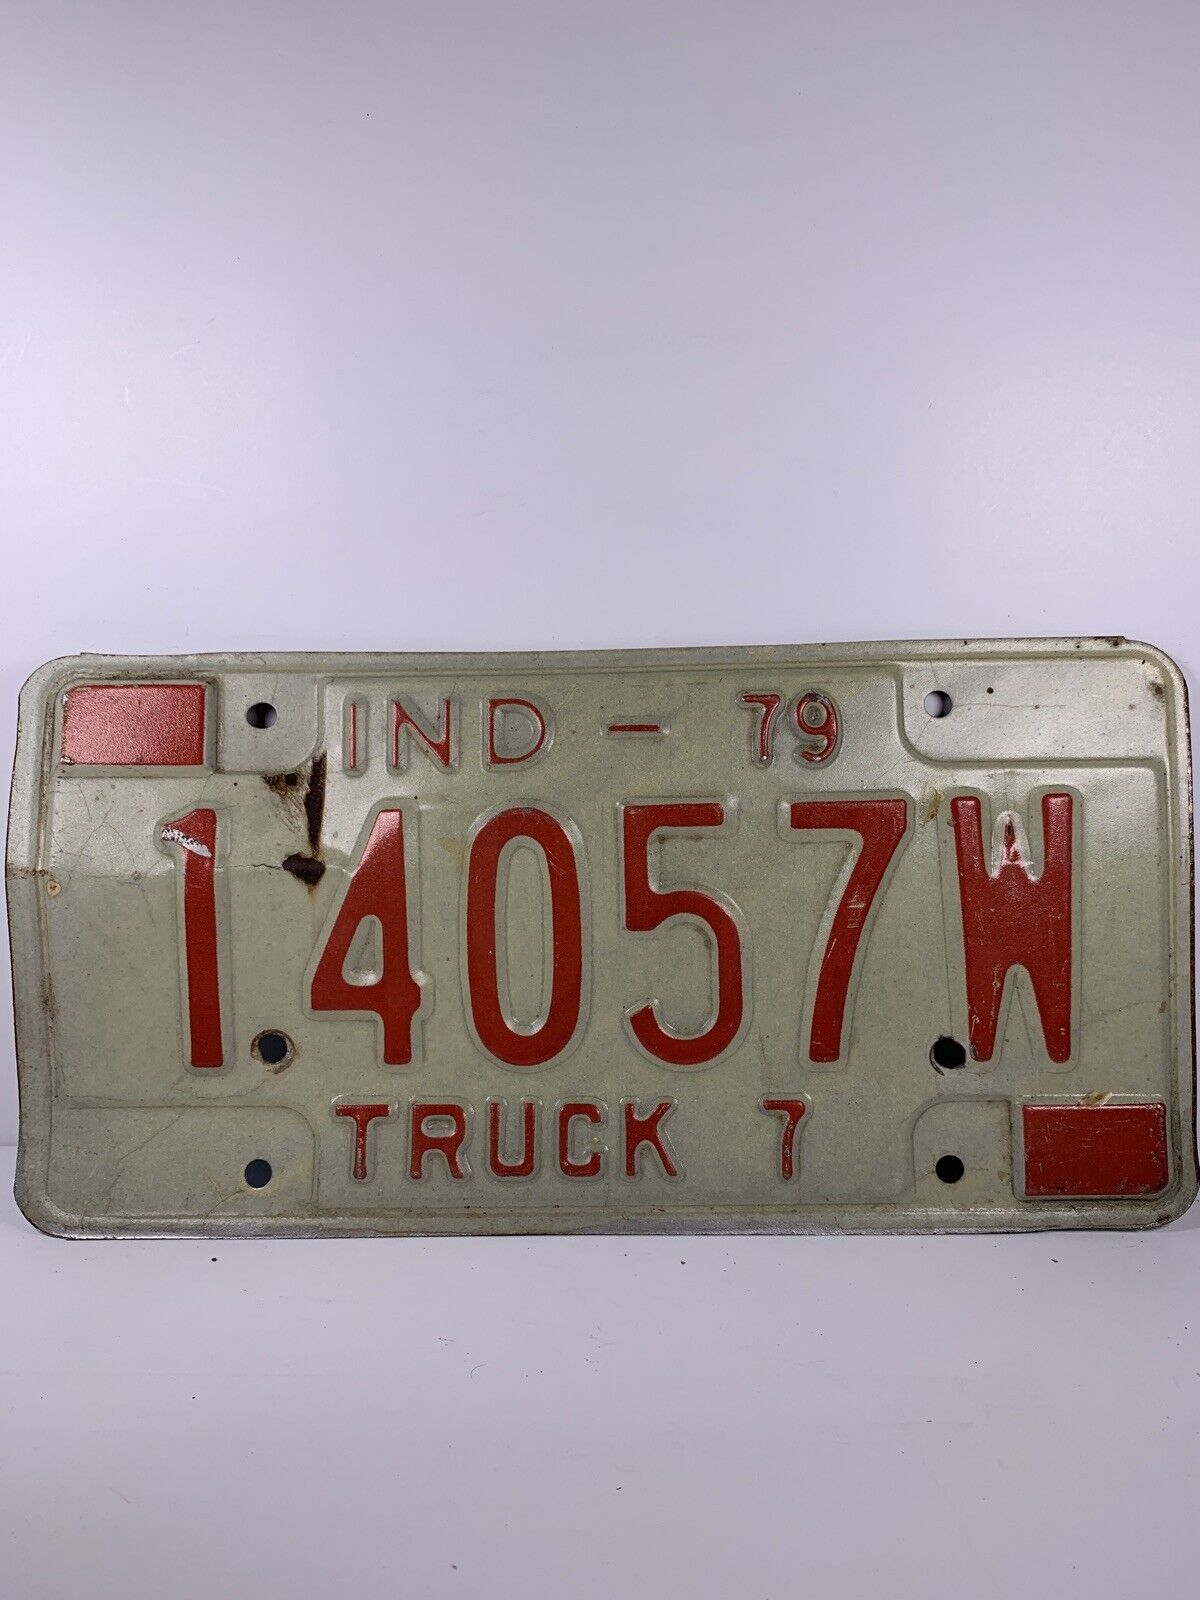 Vintage Original Indiana 1979 Year Truck License Plate 14057W Red White IND